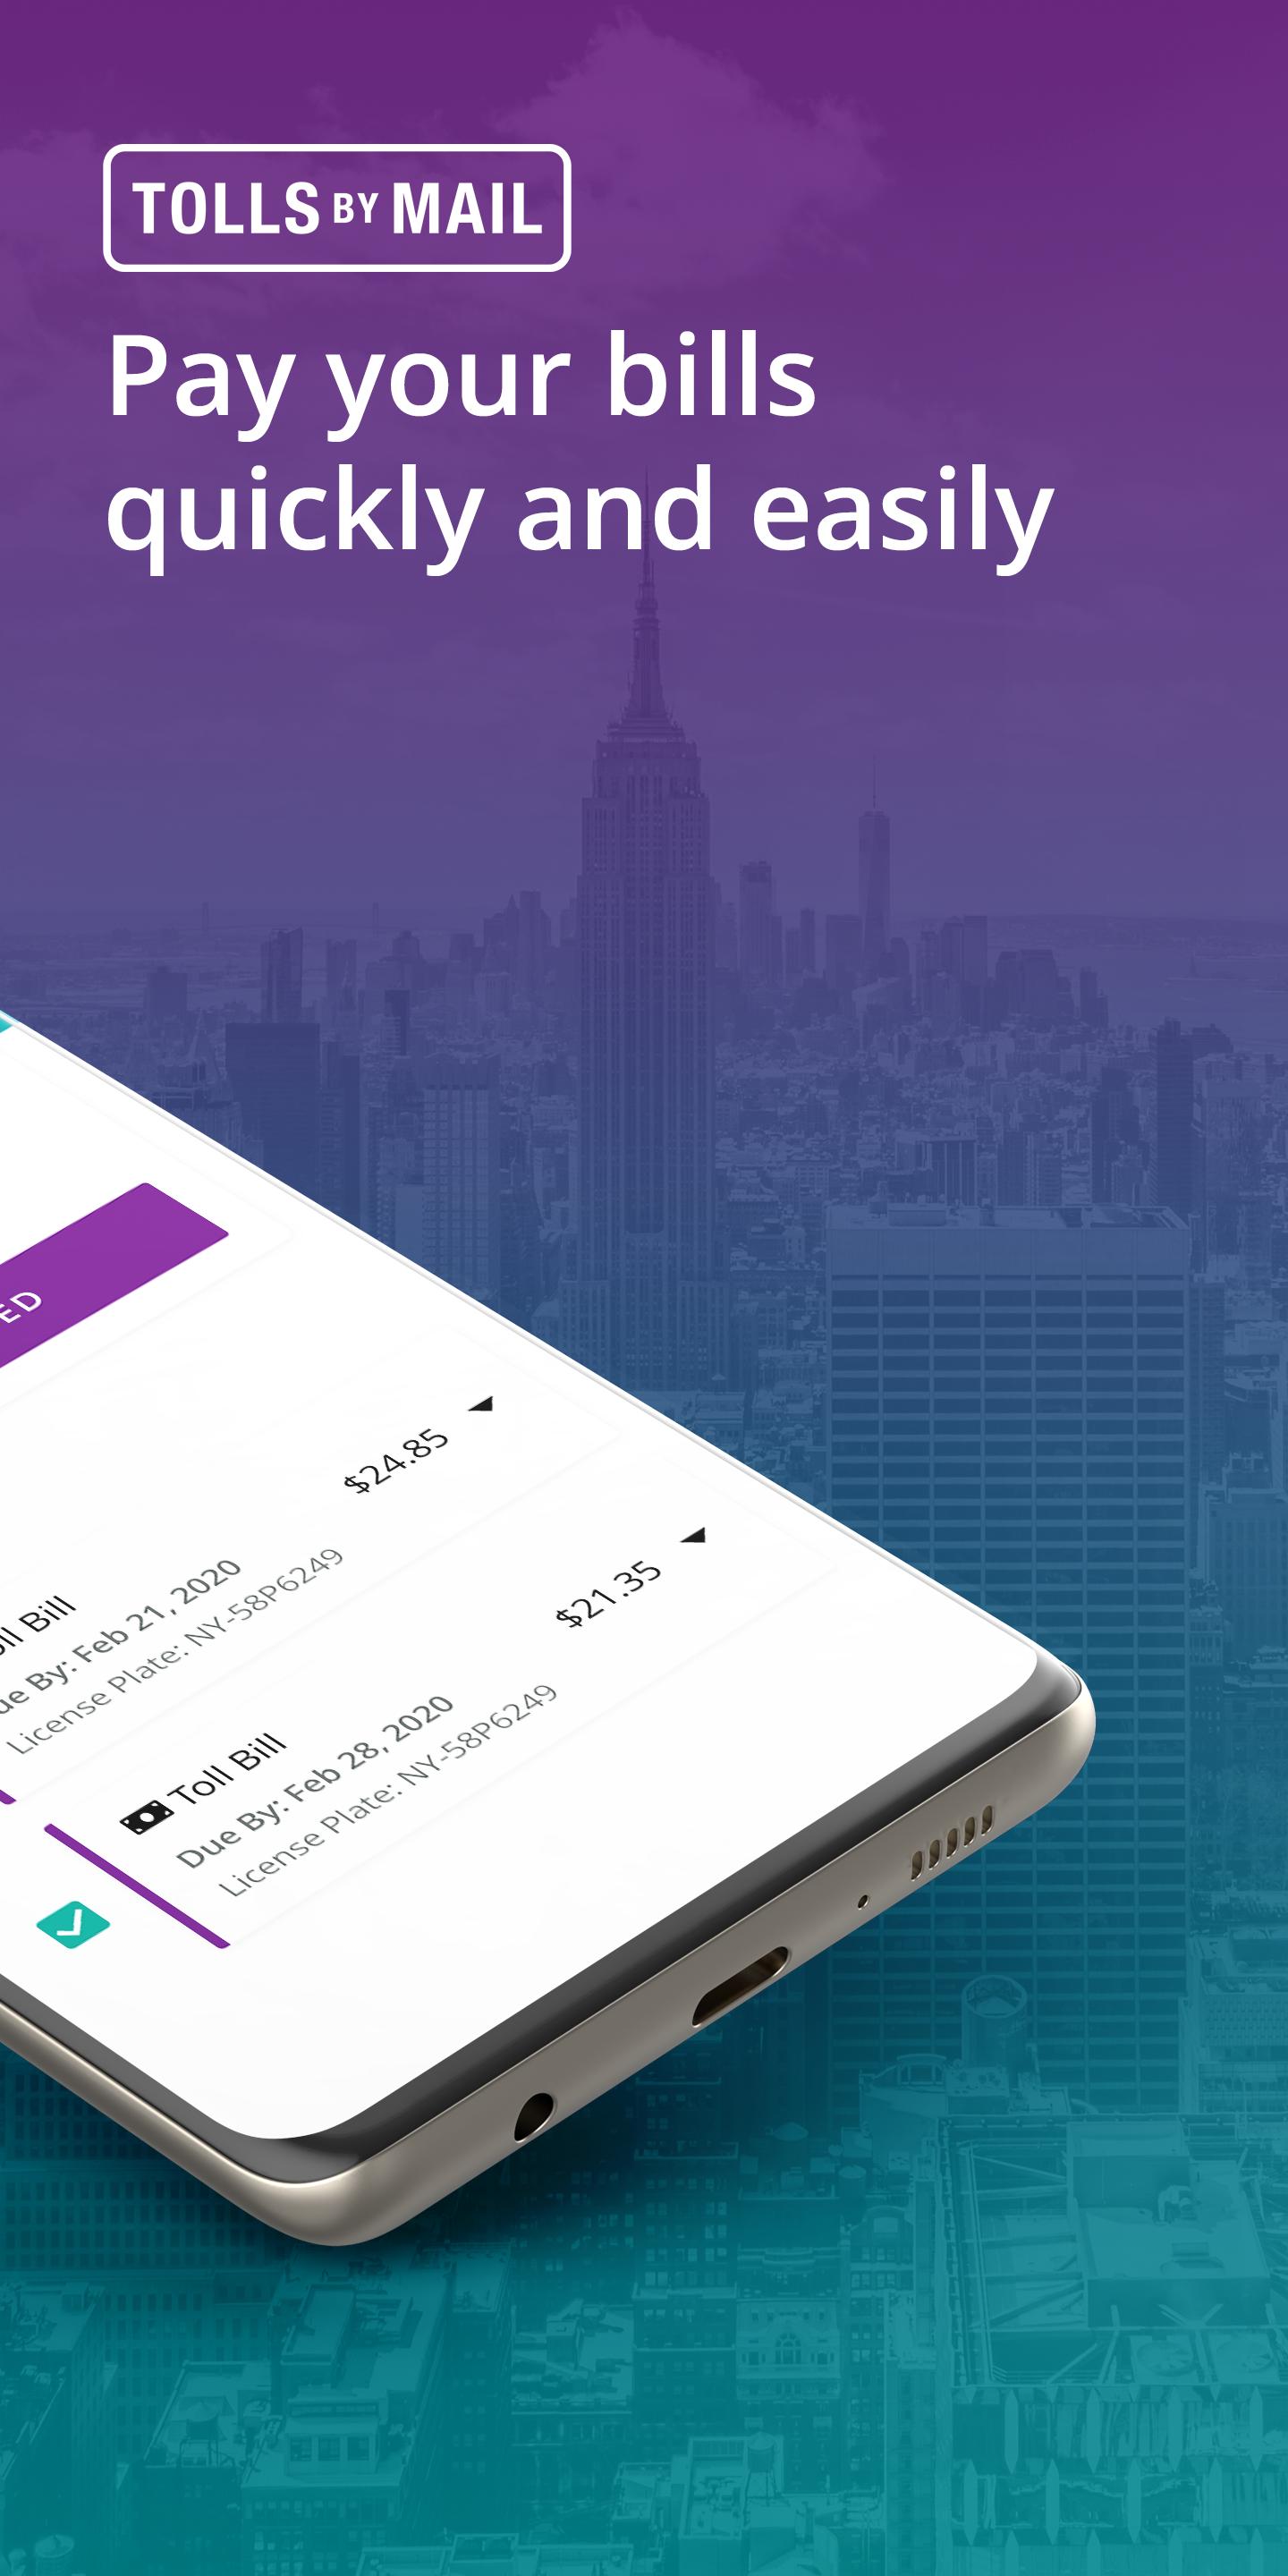 official-e-zpass-ny-for-android-apk-download